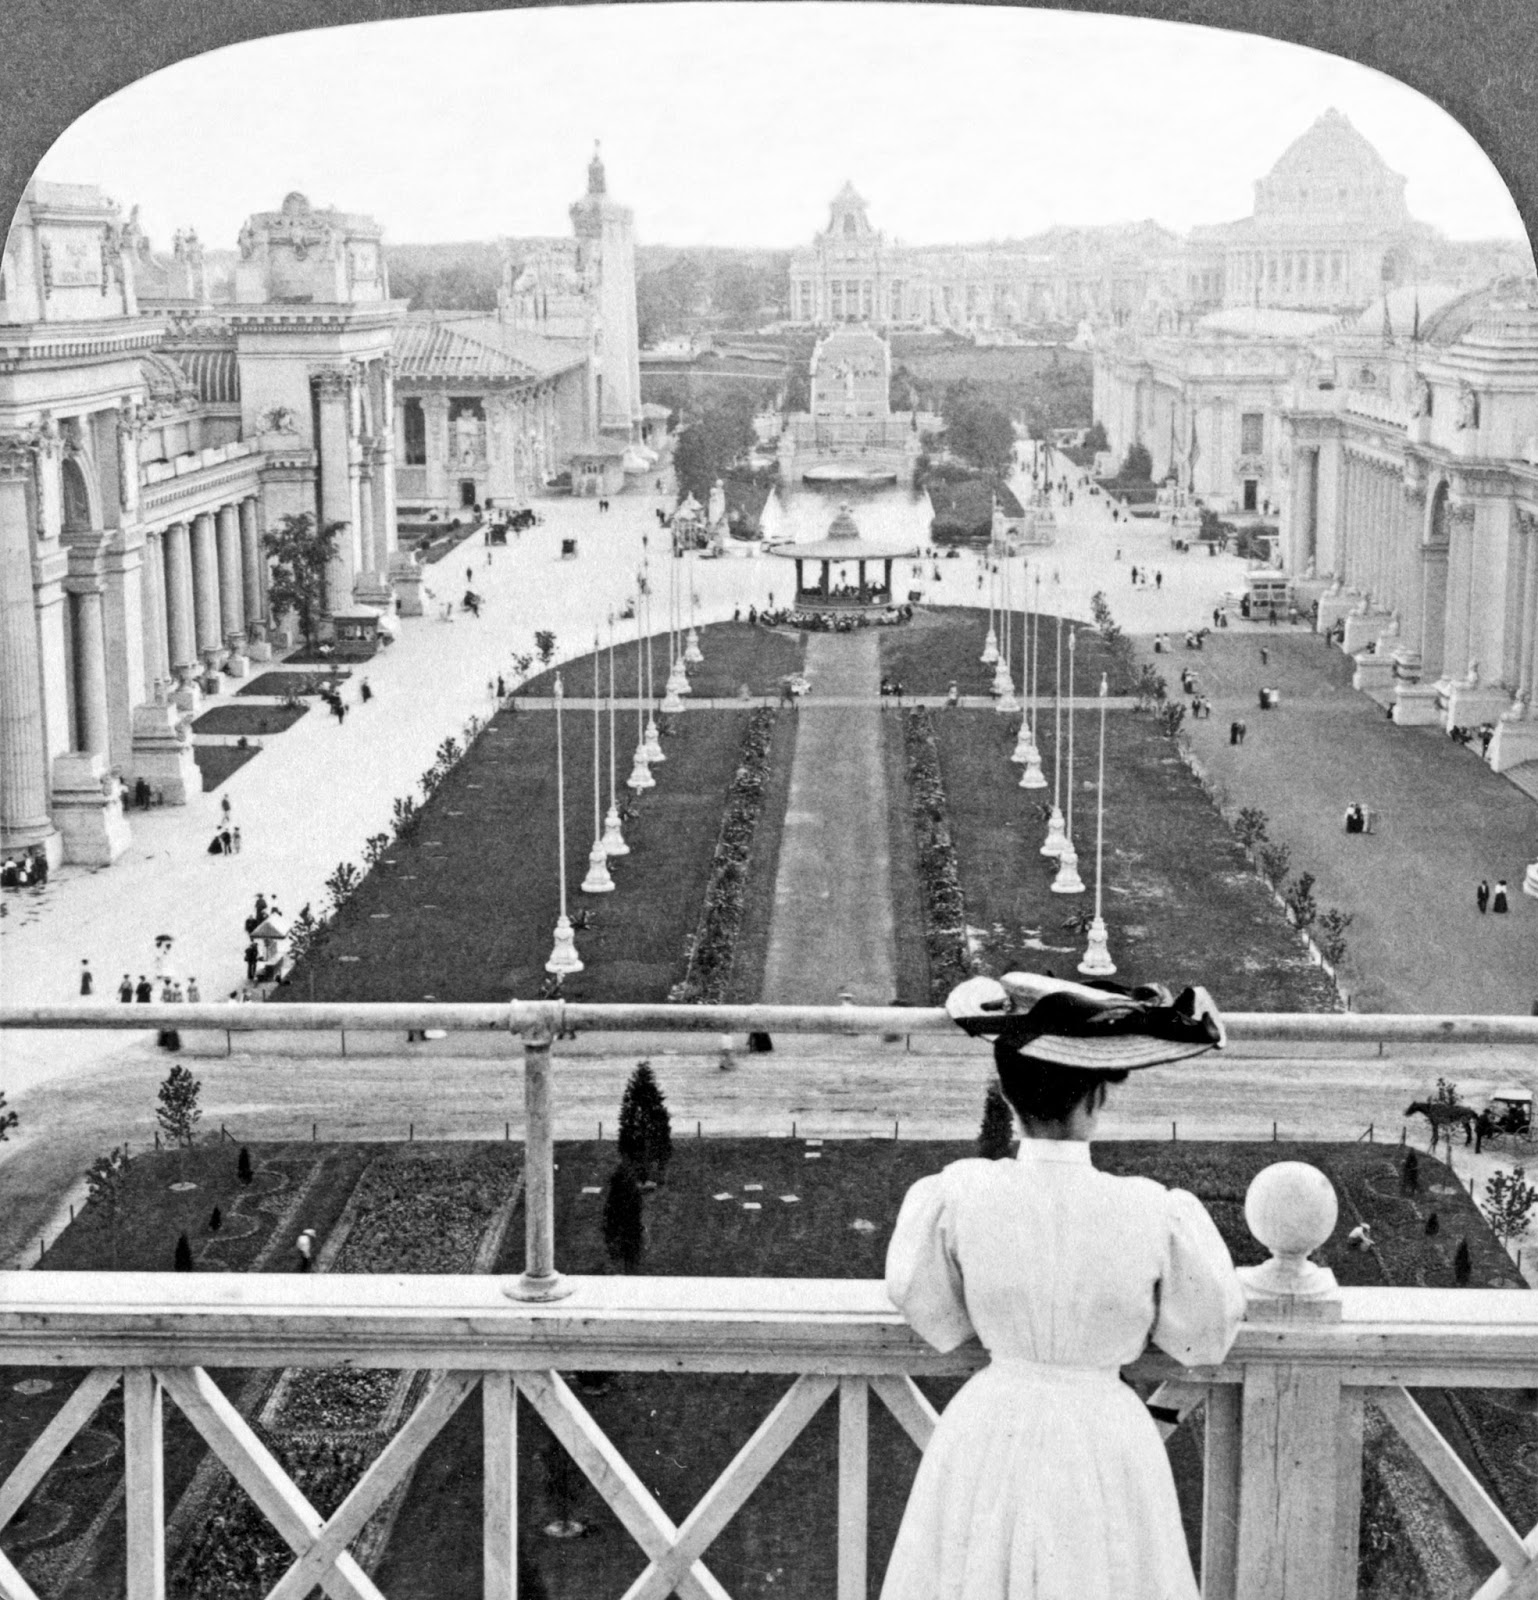 List 91+ Images why was there a “world’s fair” in st. louis of all places? Stunning